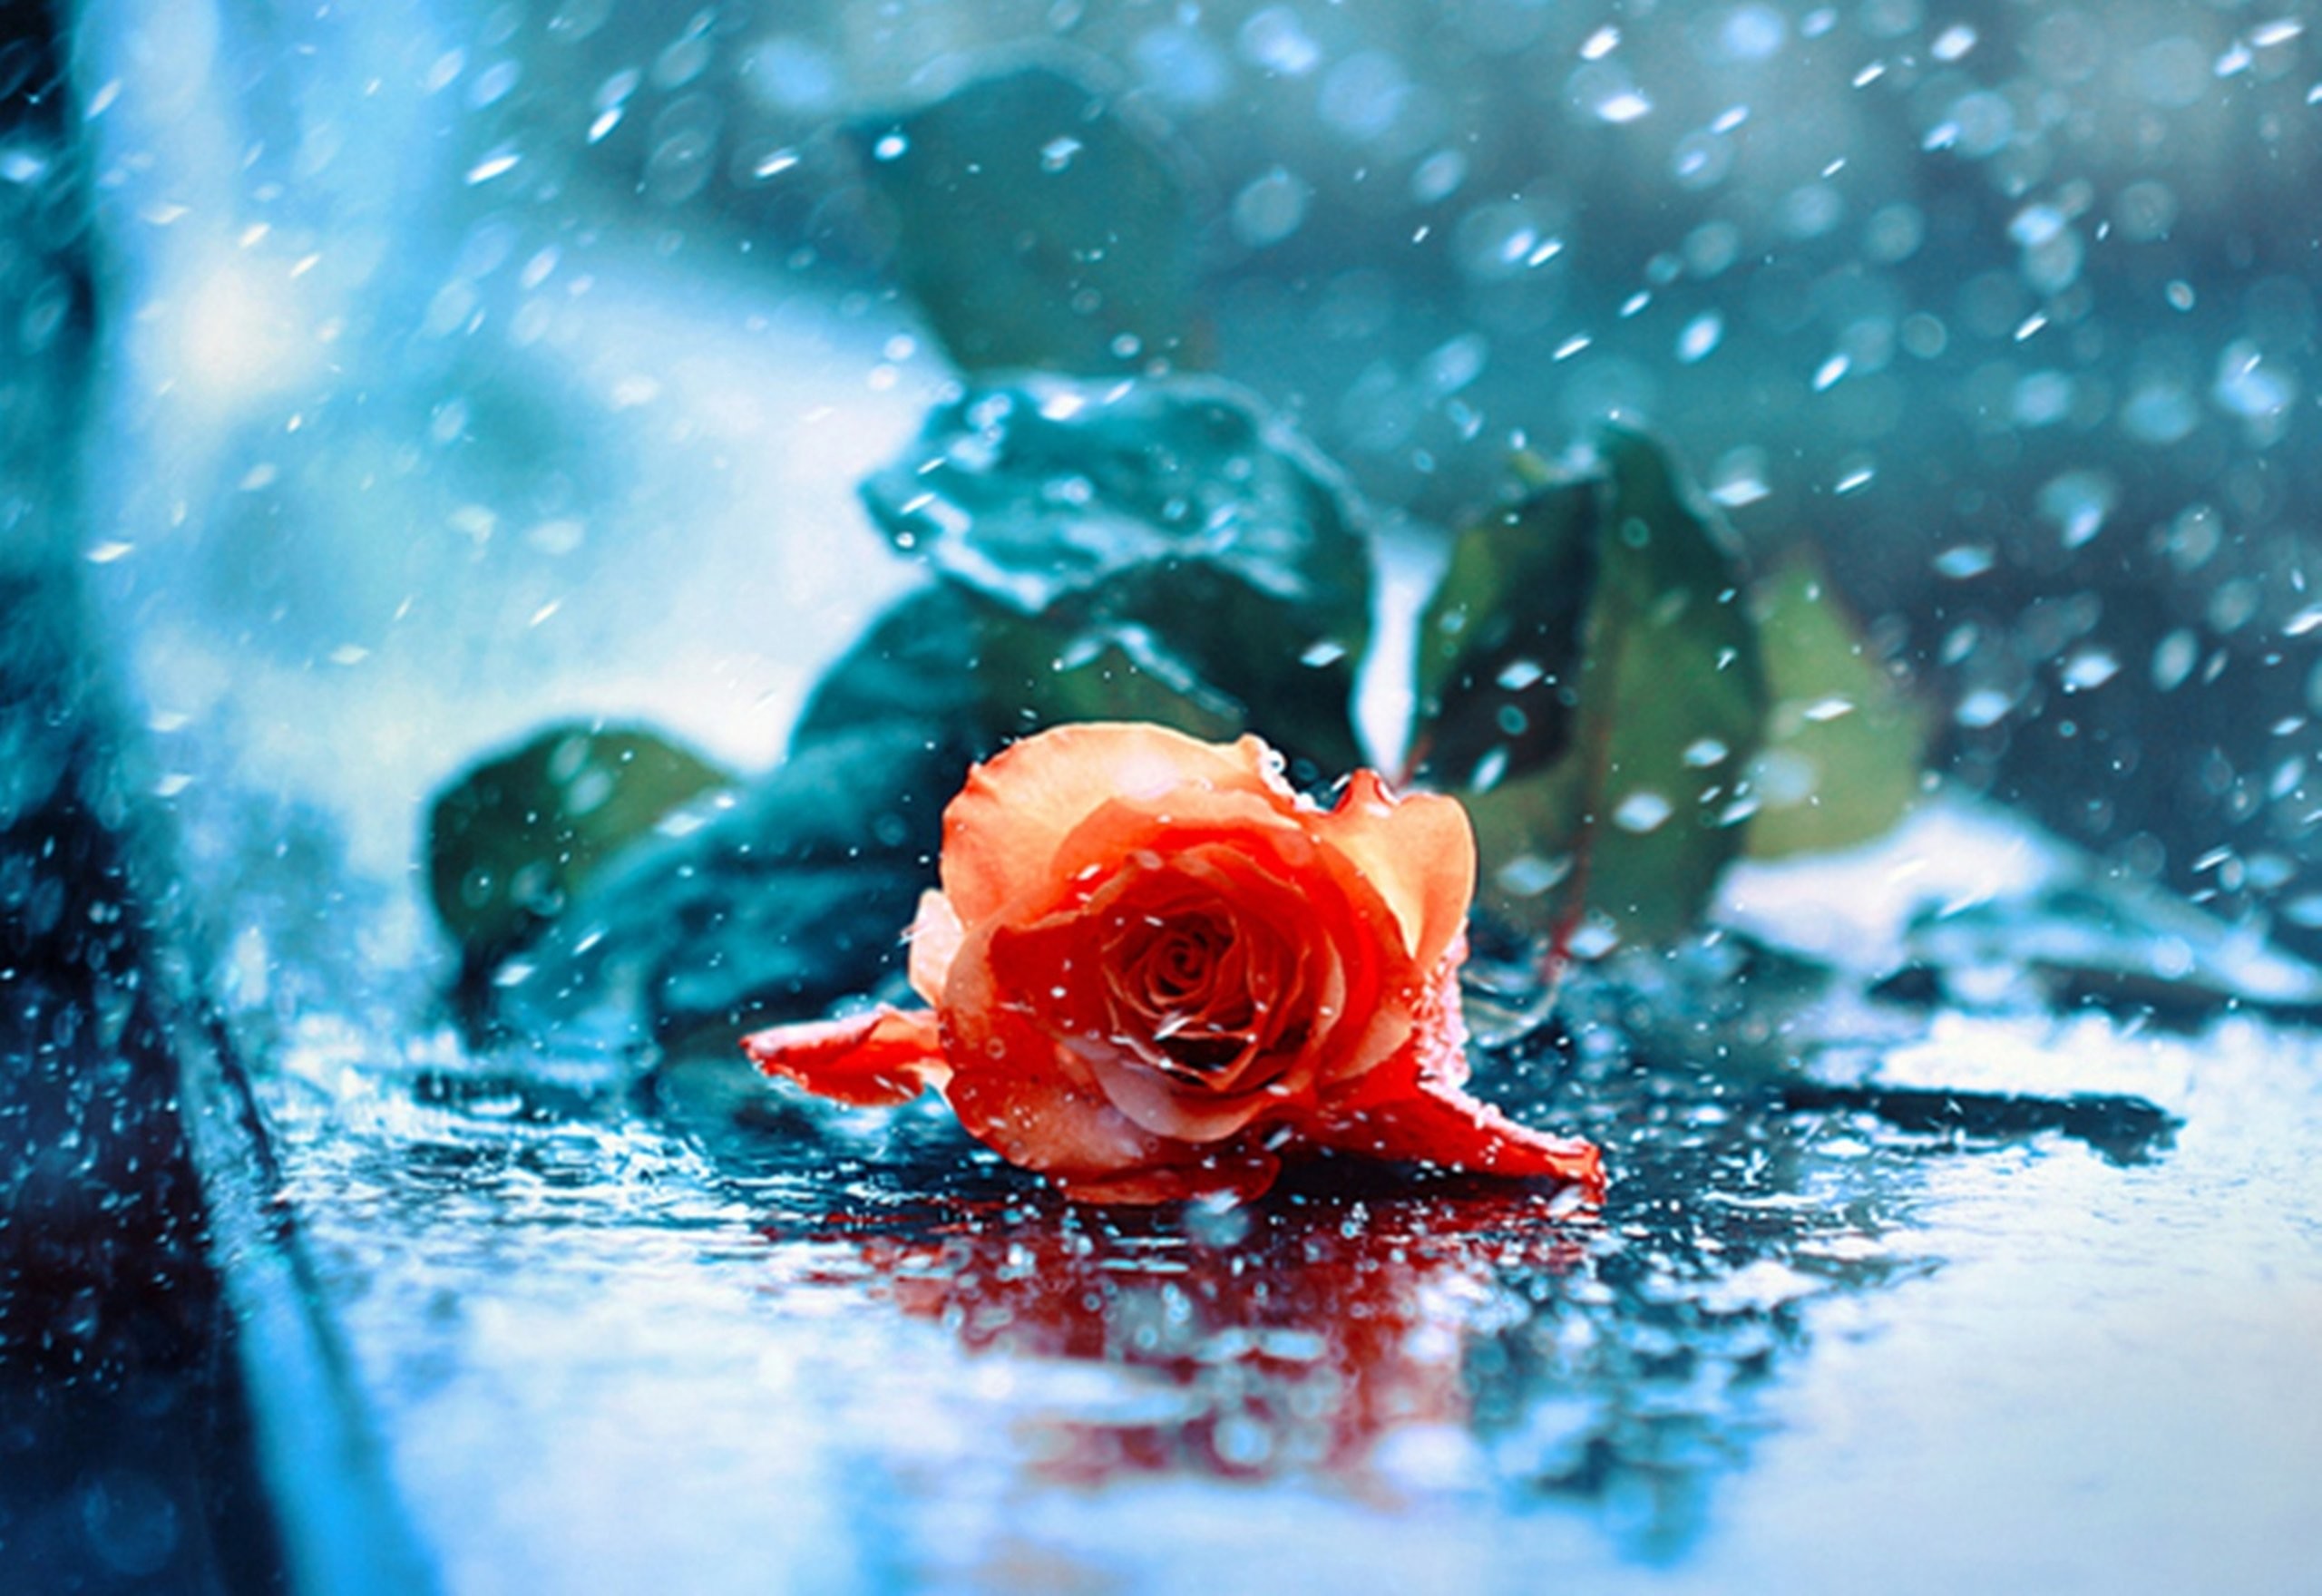 2560x1760 Water drops red red rose wet rose rose beauty beautiful rose wallpaper |   | 480087 | WallpaperUP